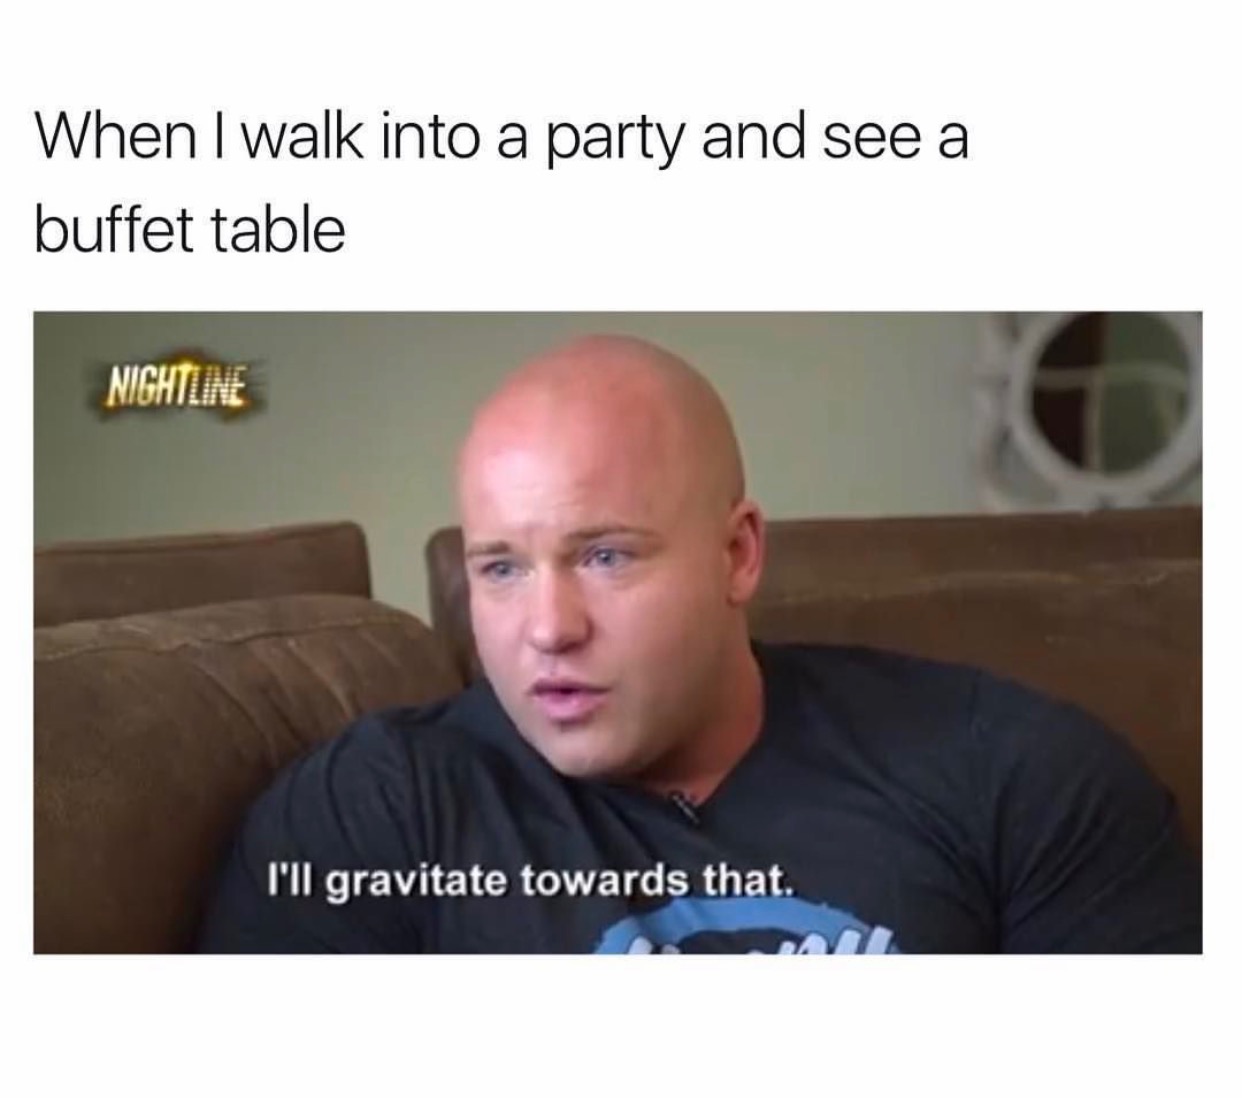 dankest memes on the web - When I walk into a party and see a buffet table Nightline I'll gravitate towards that.